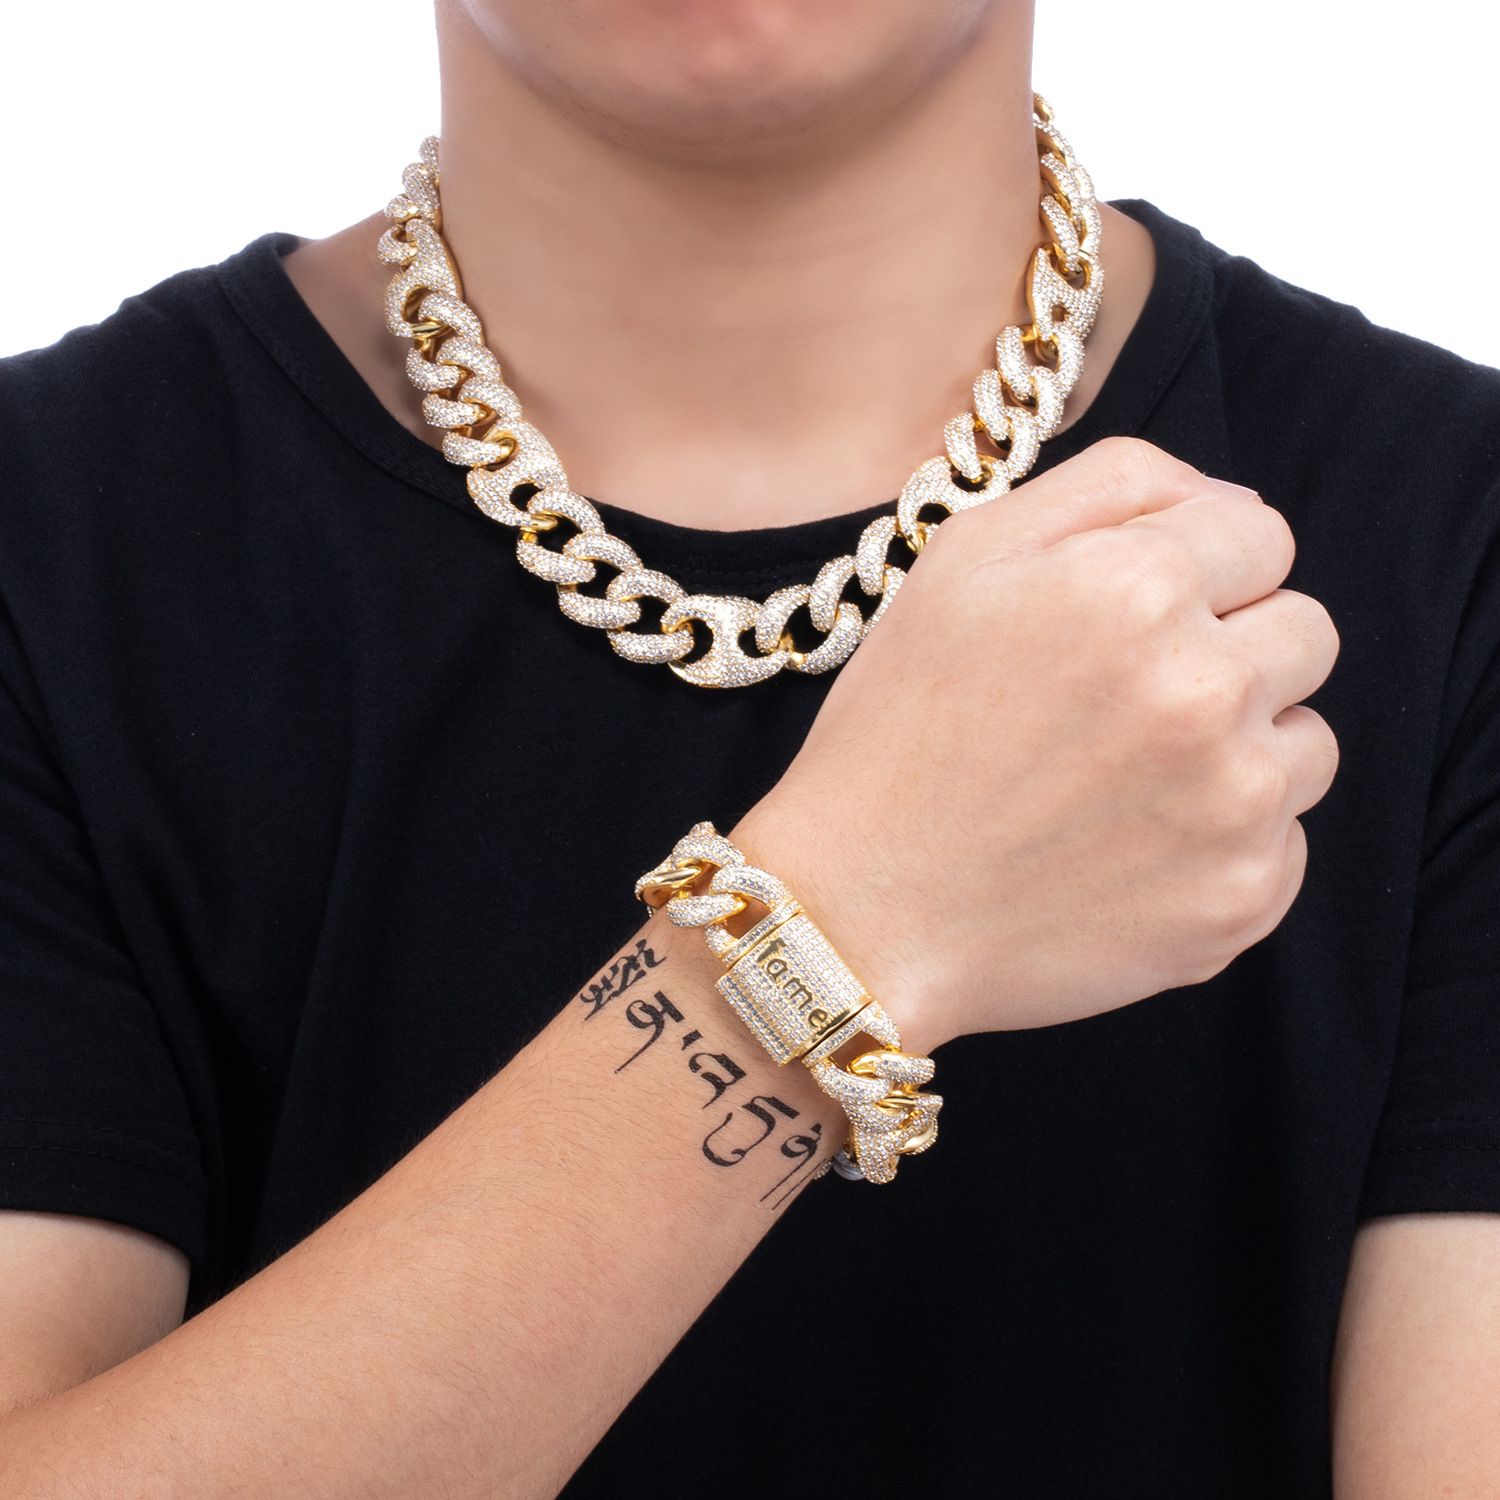 Buy Three Shades Mens Bracelet Gold-Plated Link Design With American  Diamonds at Amazon.in